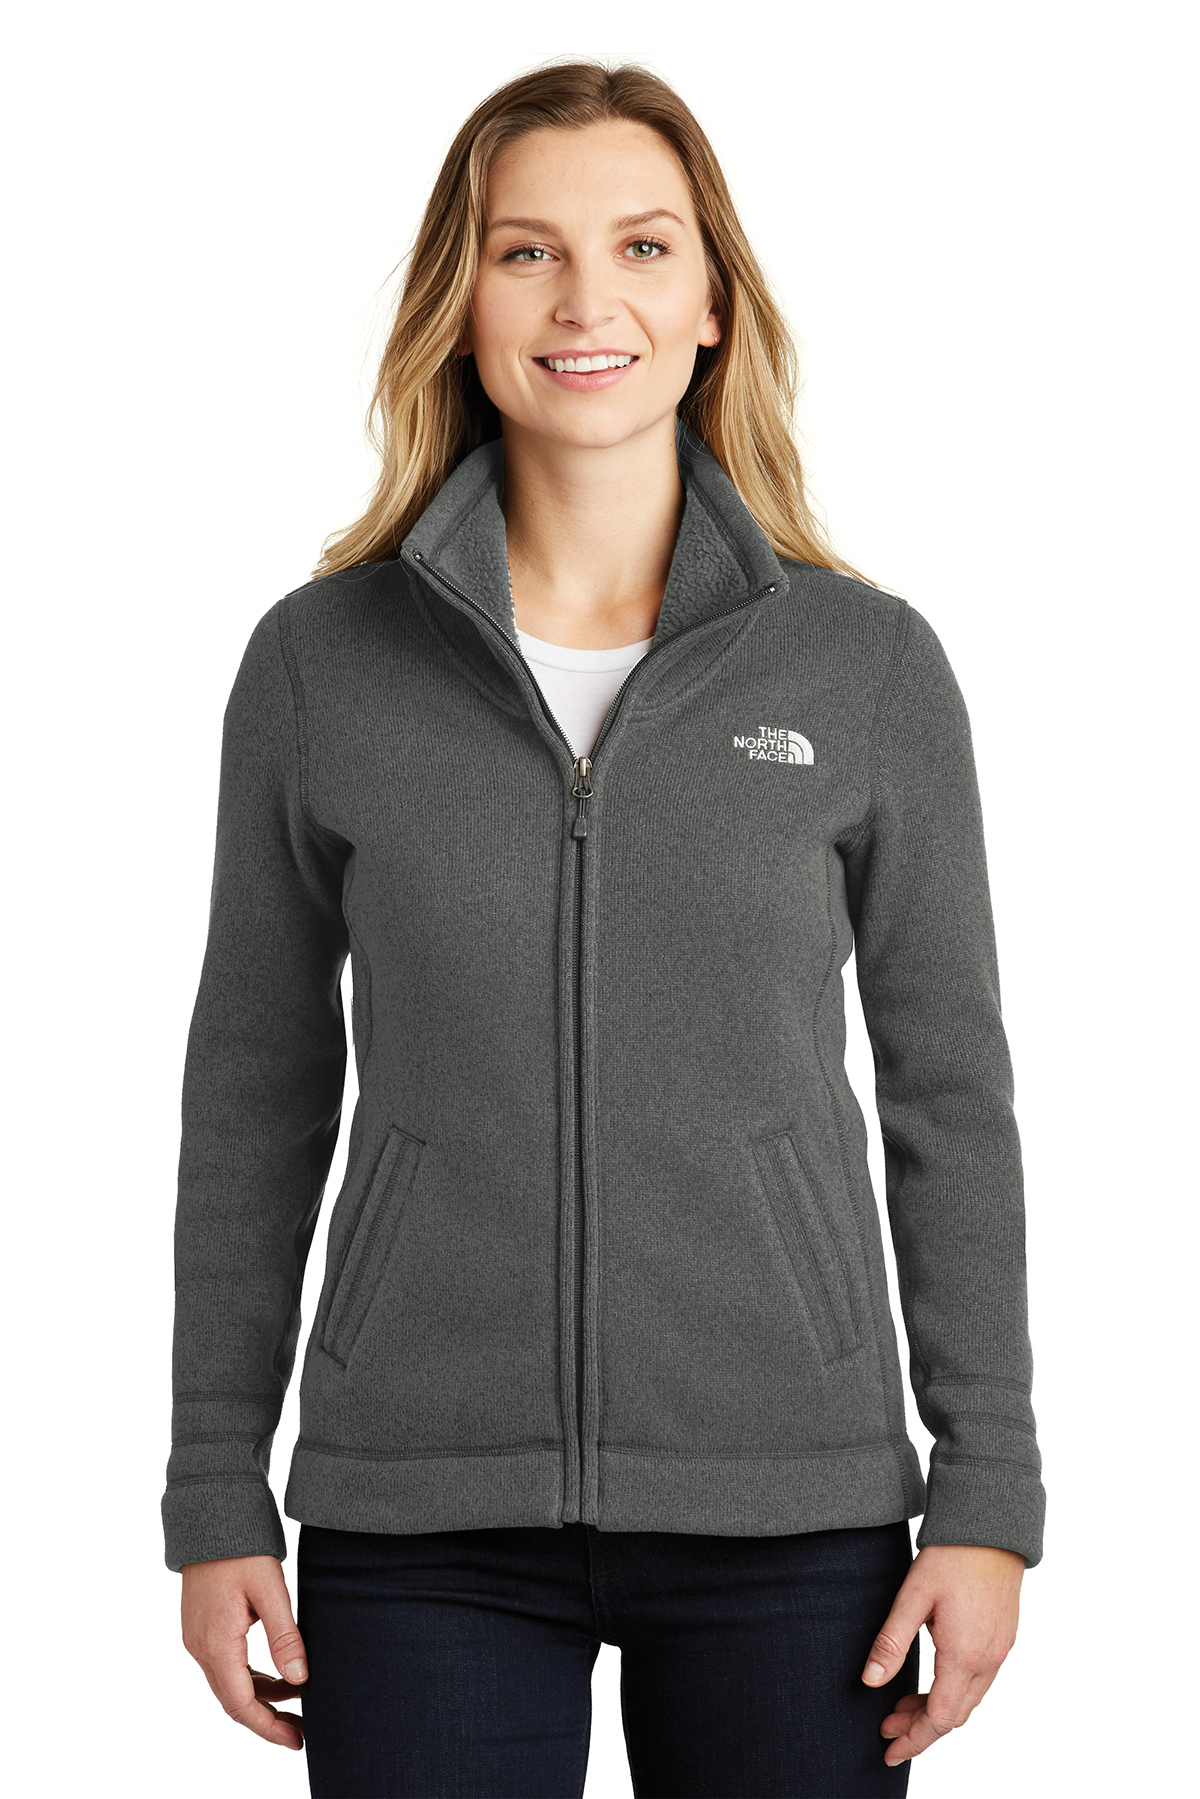 THE NORTH FACE Women's PR Osito Jacket